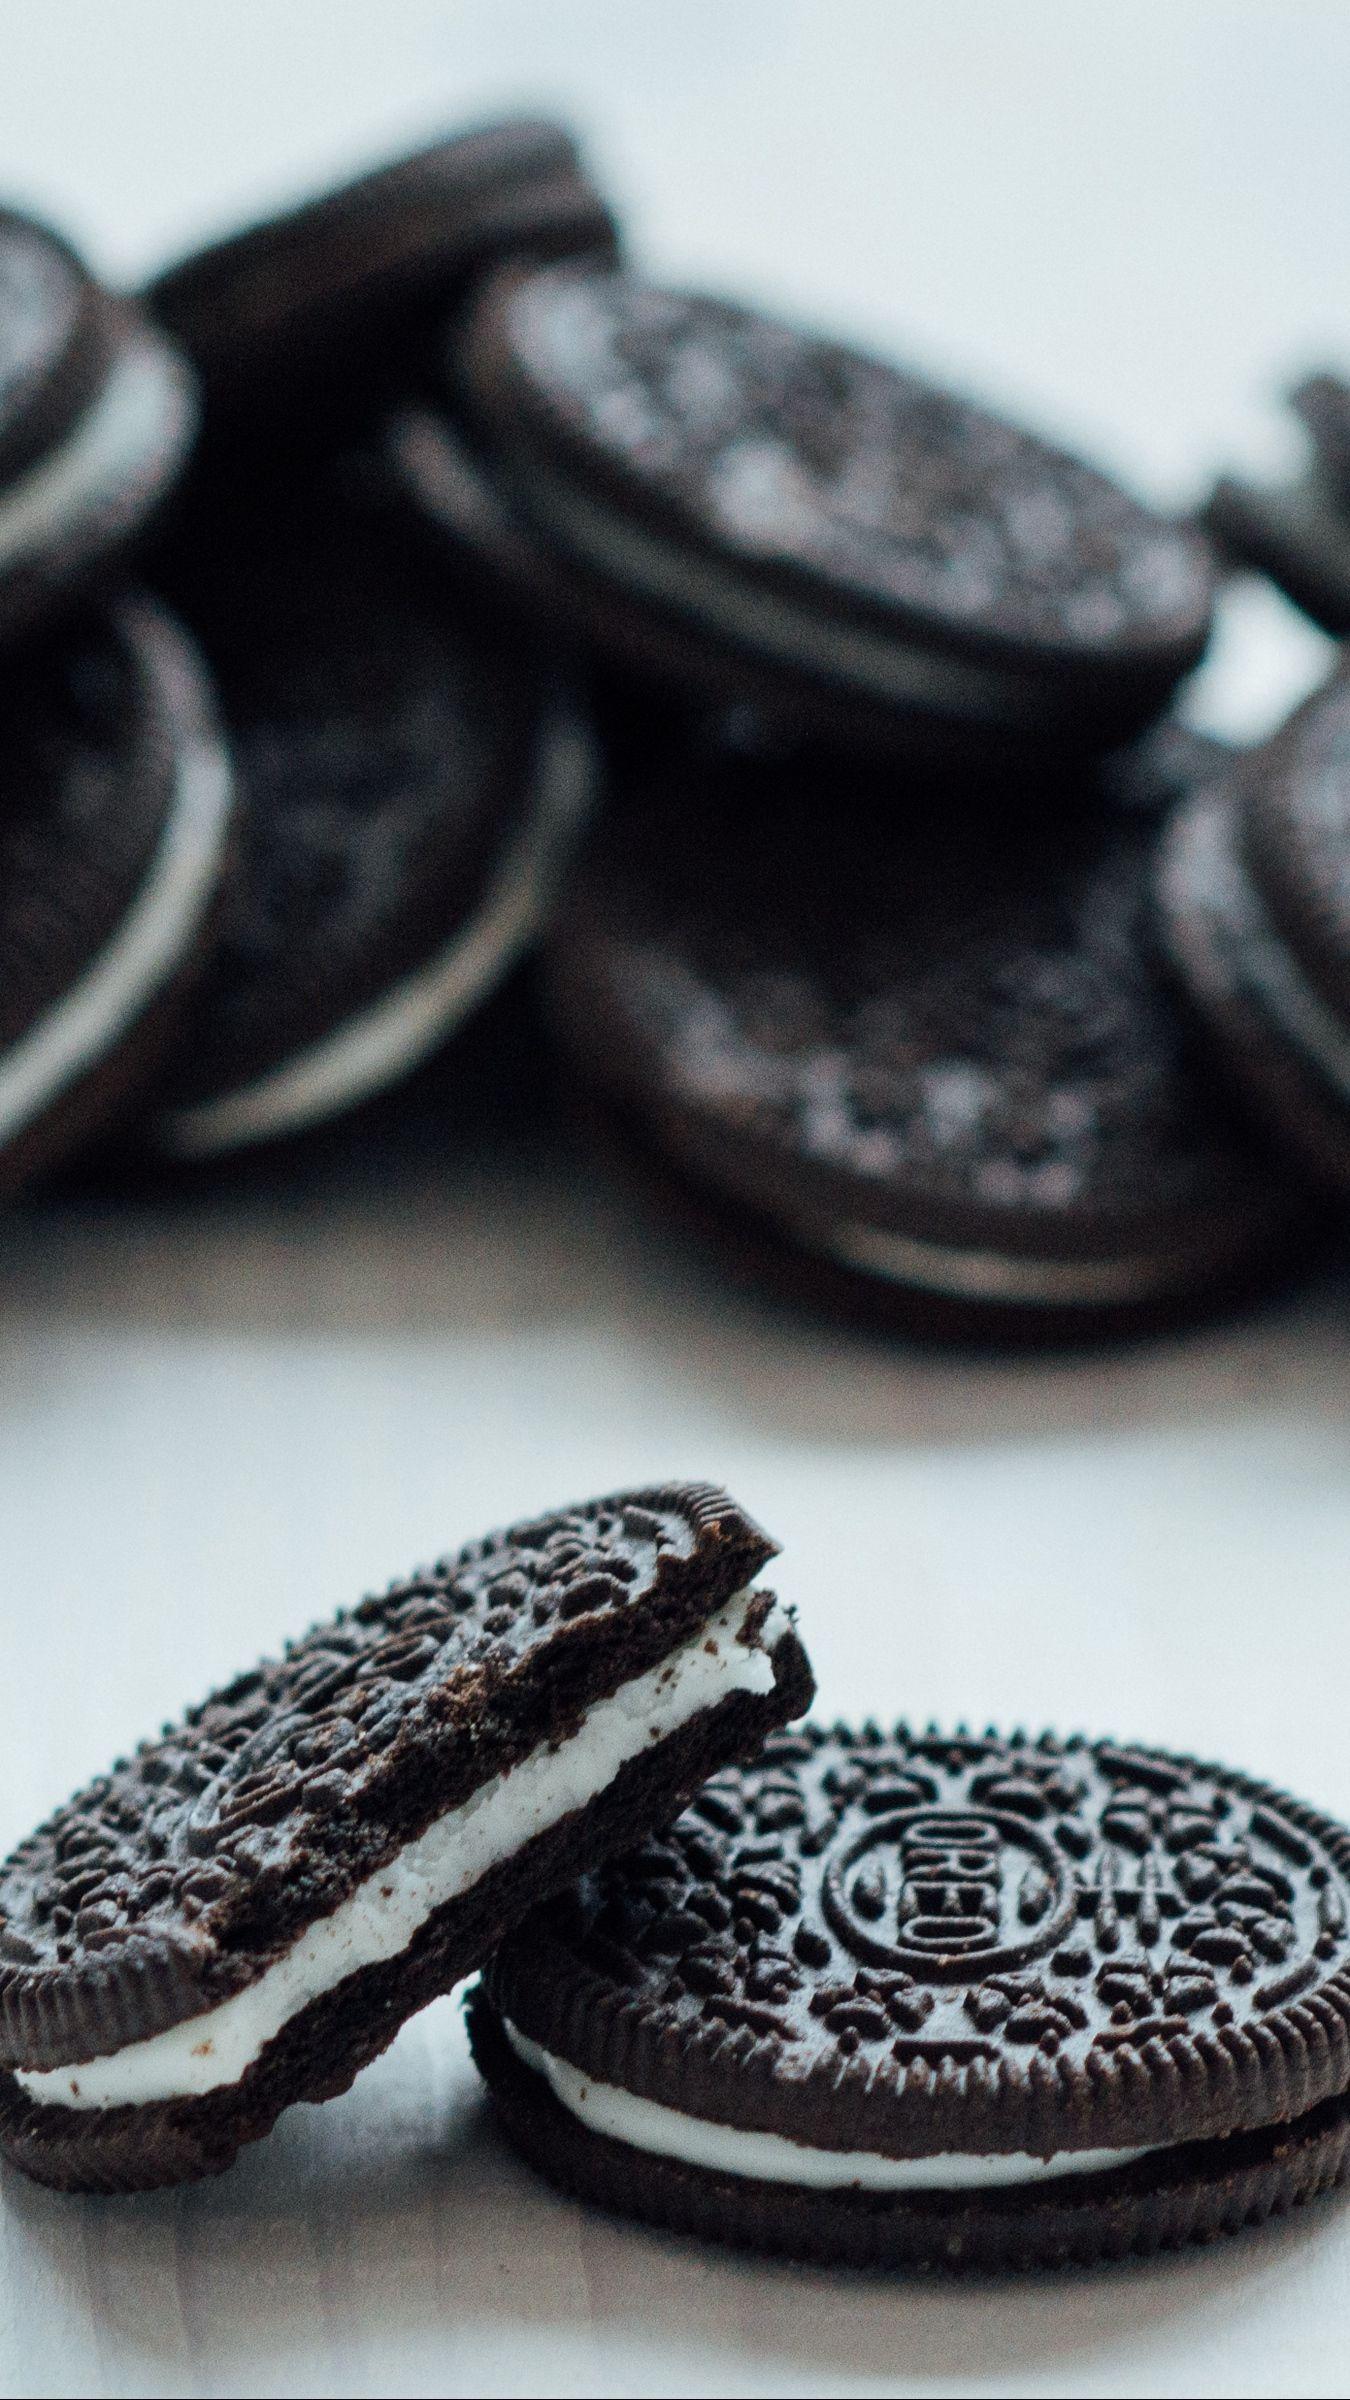 A close up of an oreo cookie - Oreo